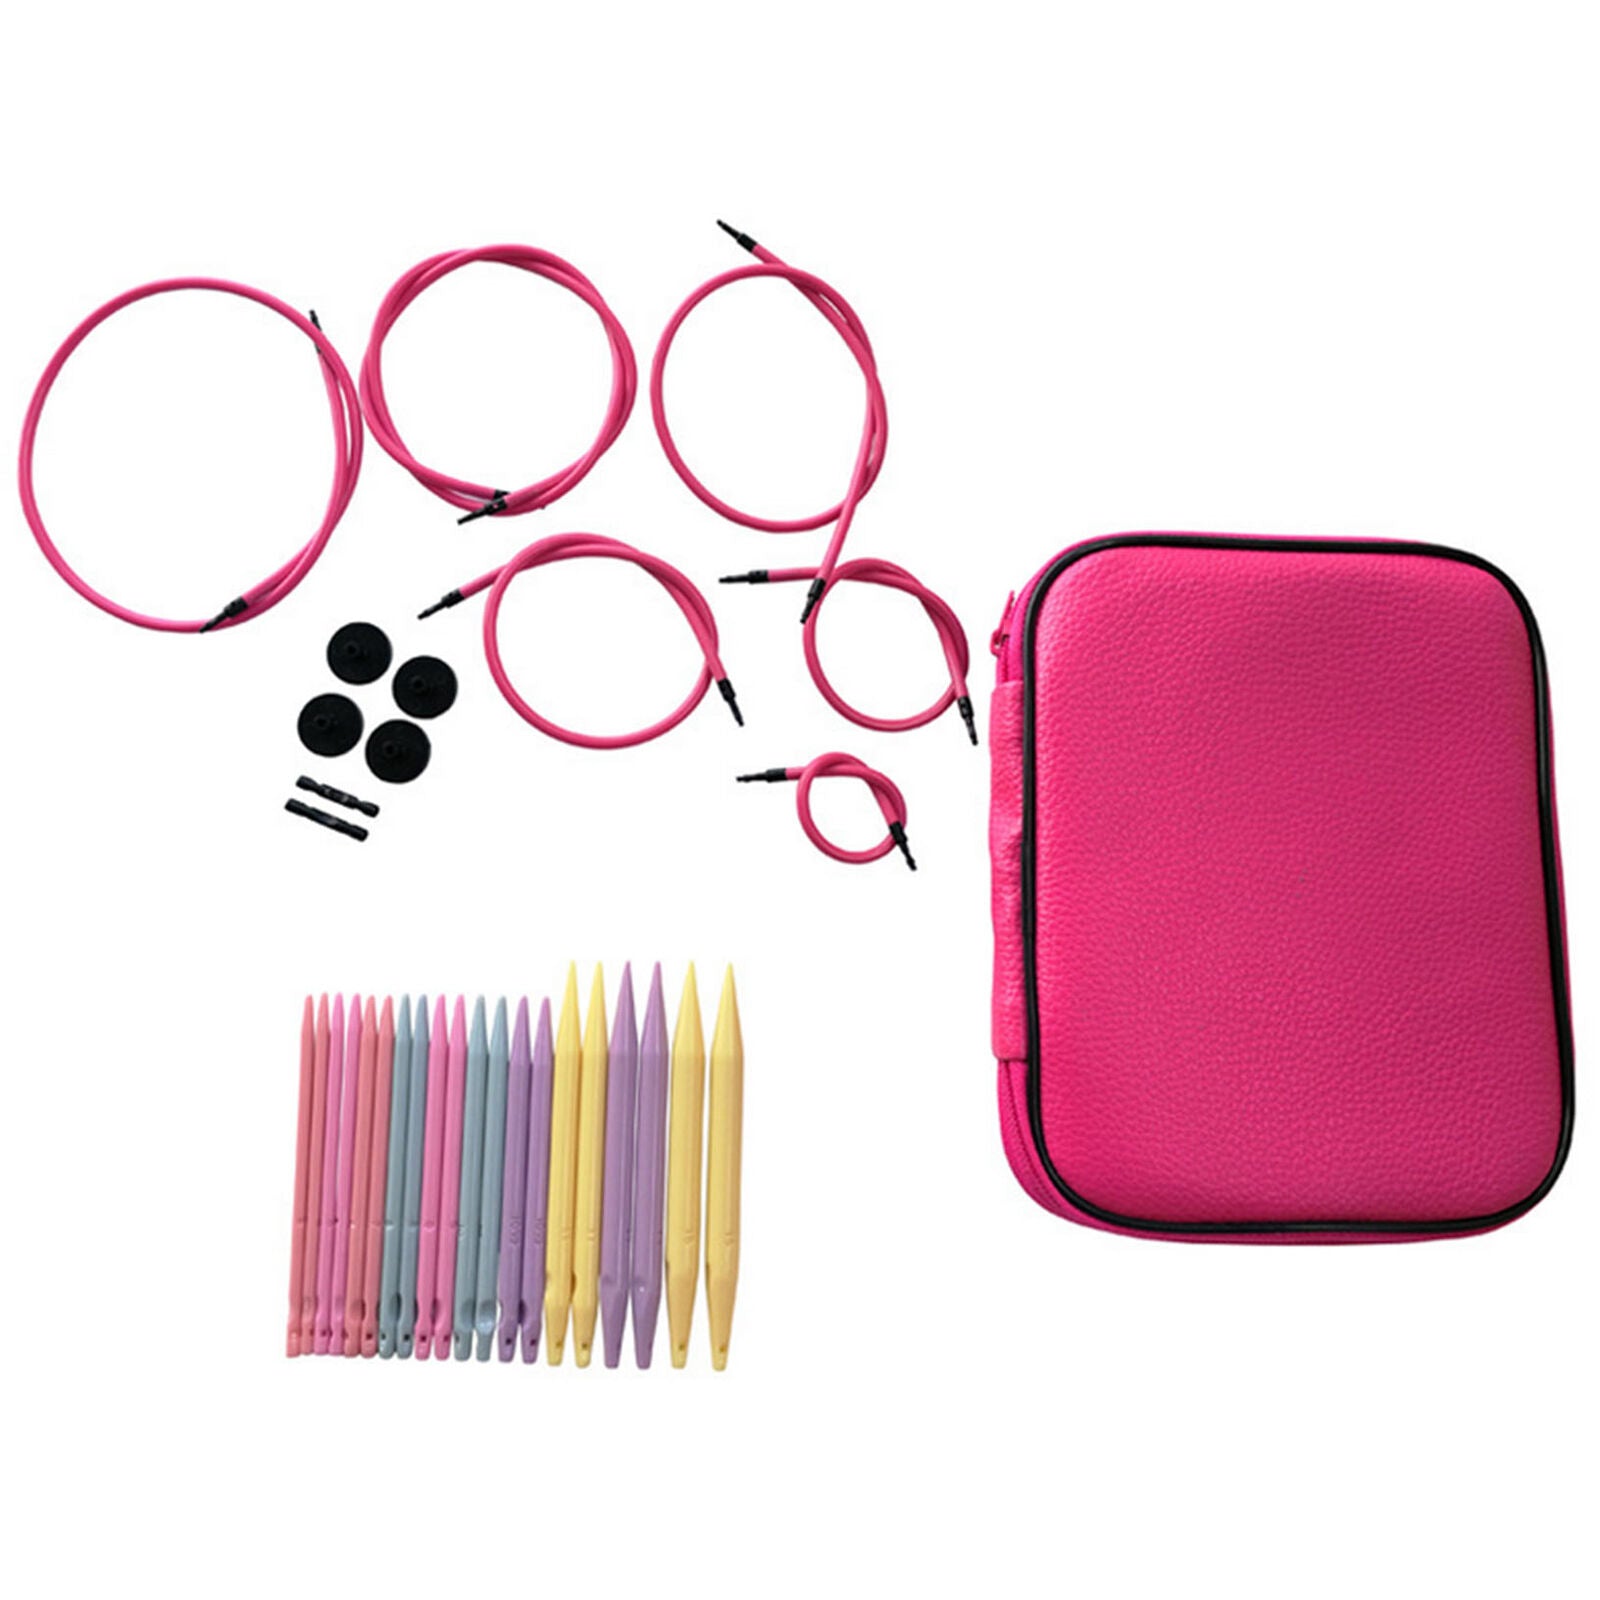 20pcs Circular Knitting Needle and Cable Interchangeable Knitting Needle Set